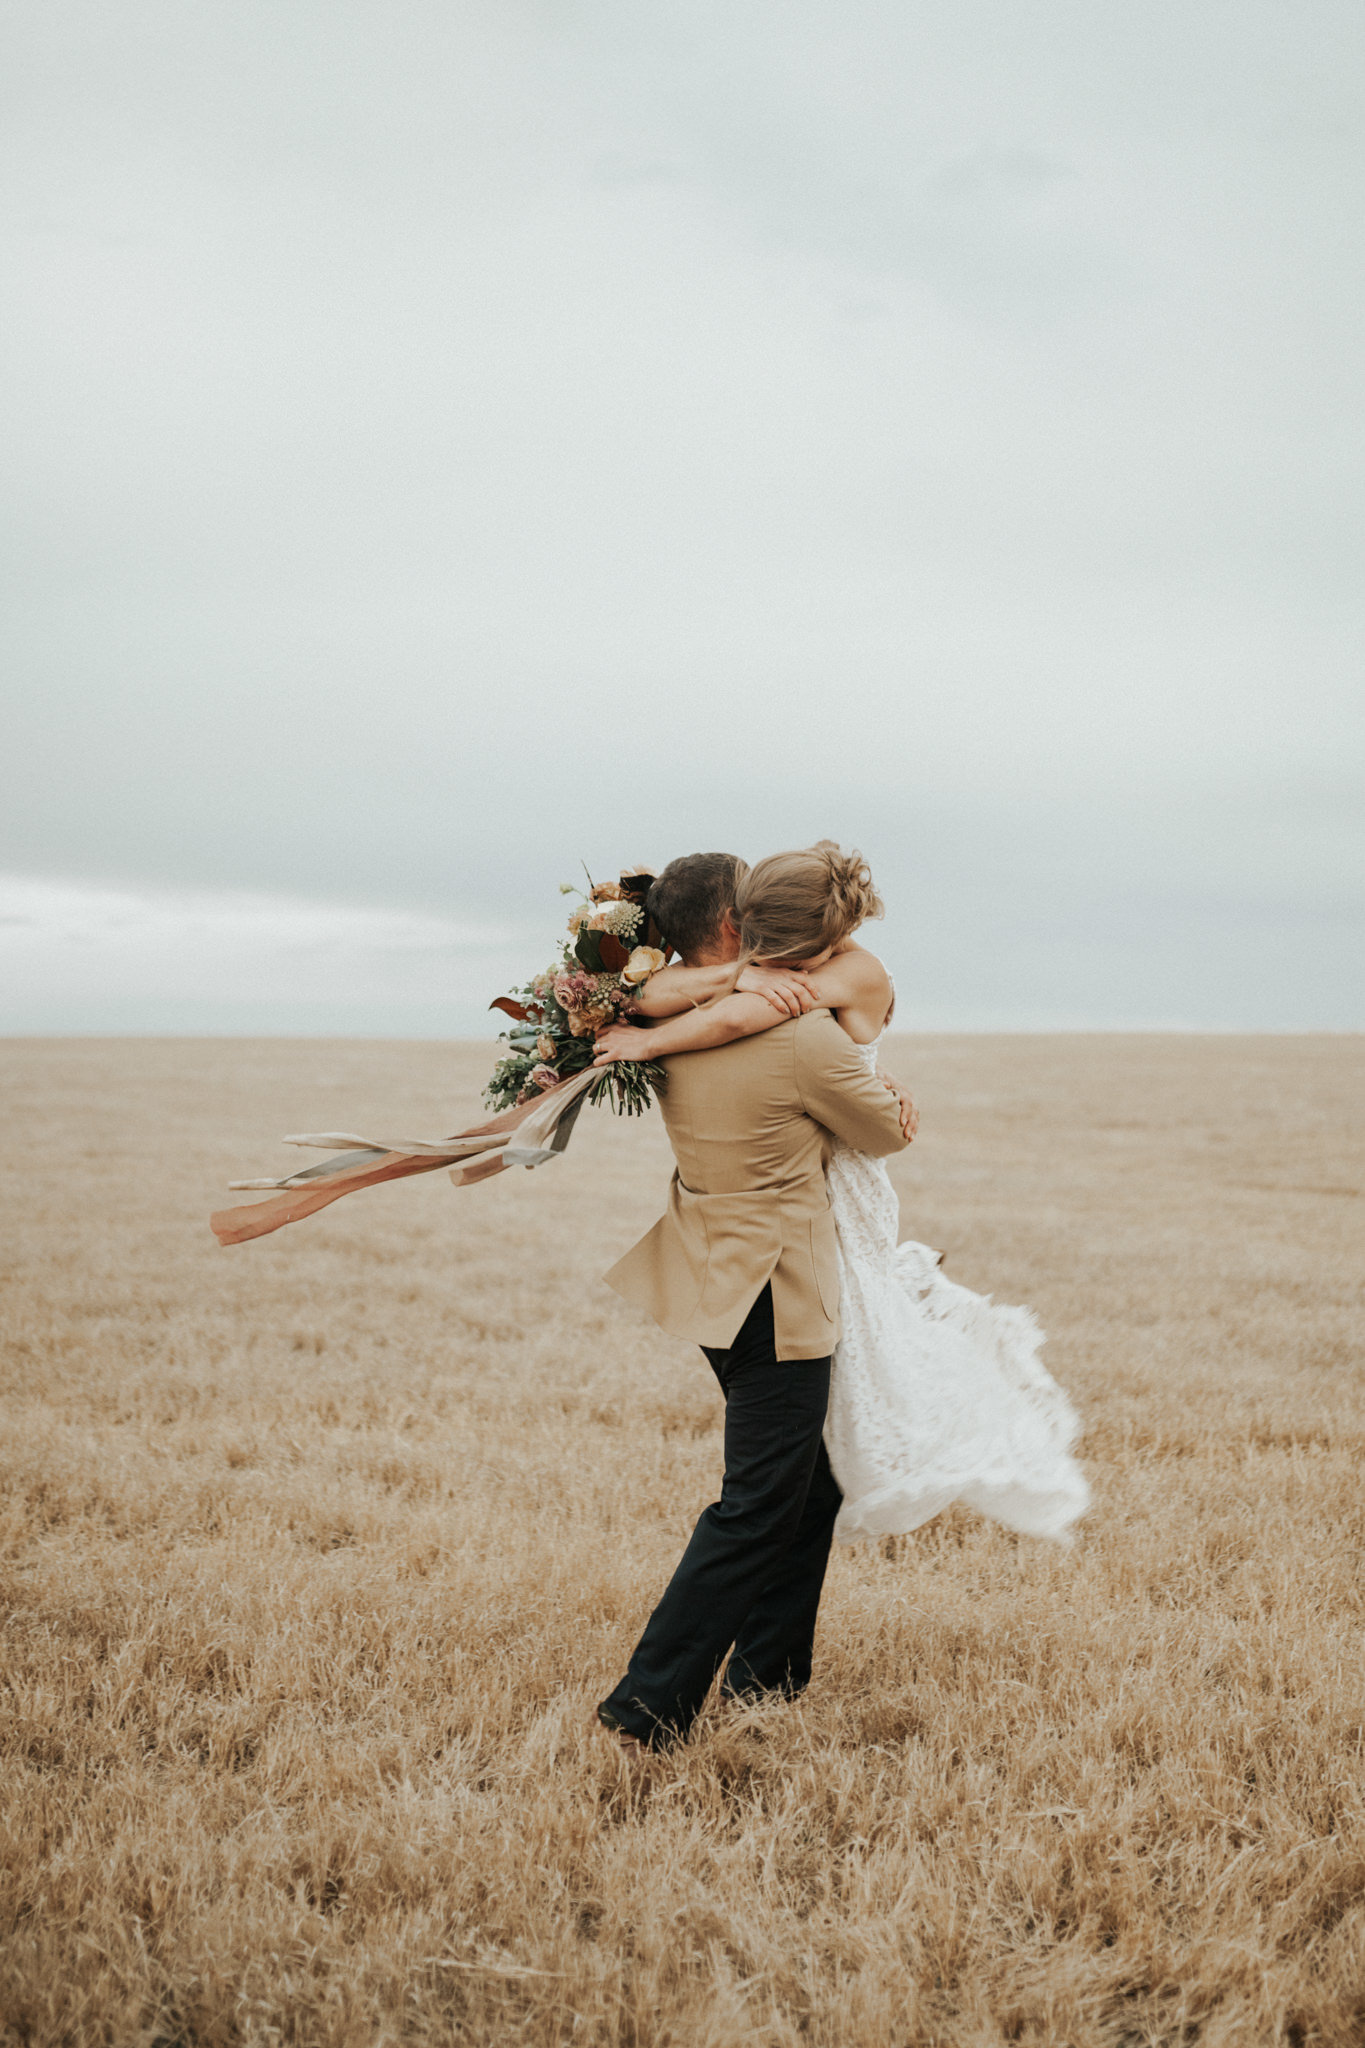 A bride and groom photo in an open field at sunset.